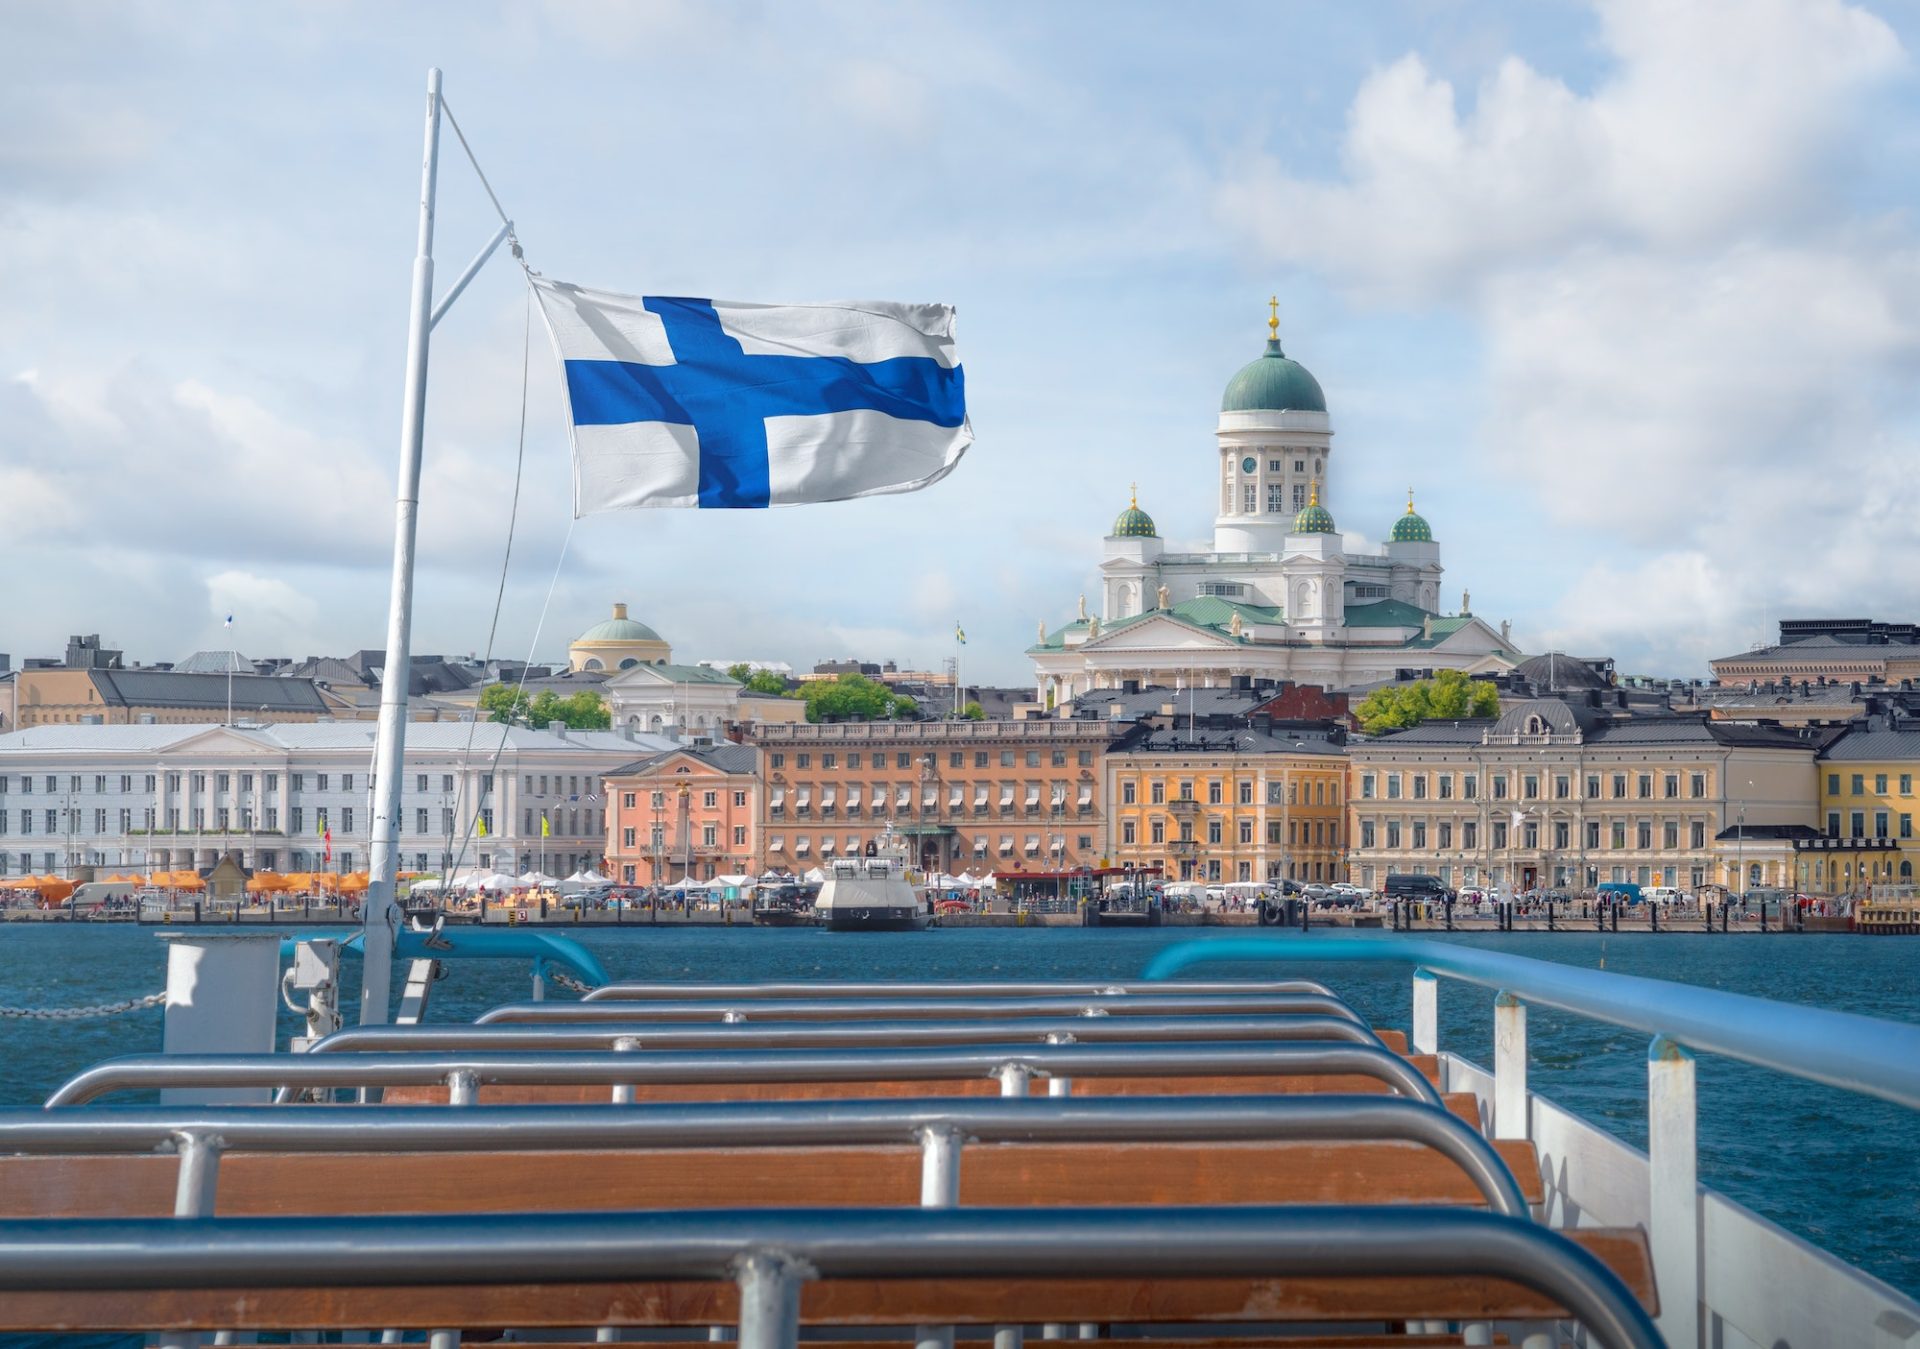 Helsinki skyline boat view with Finnish flag and Helsinki Cathedral - Helsinki, Finland